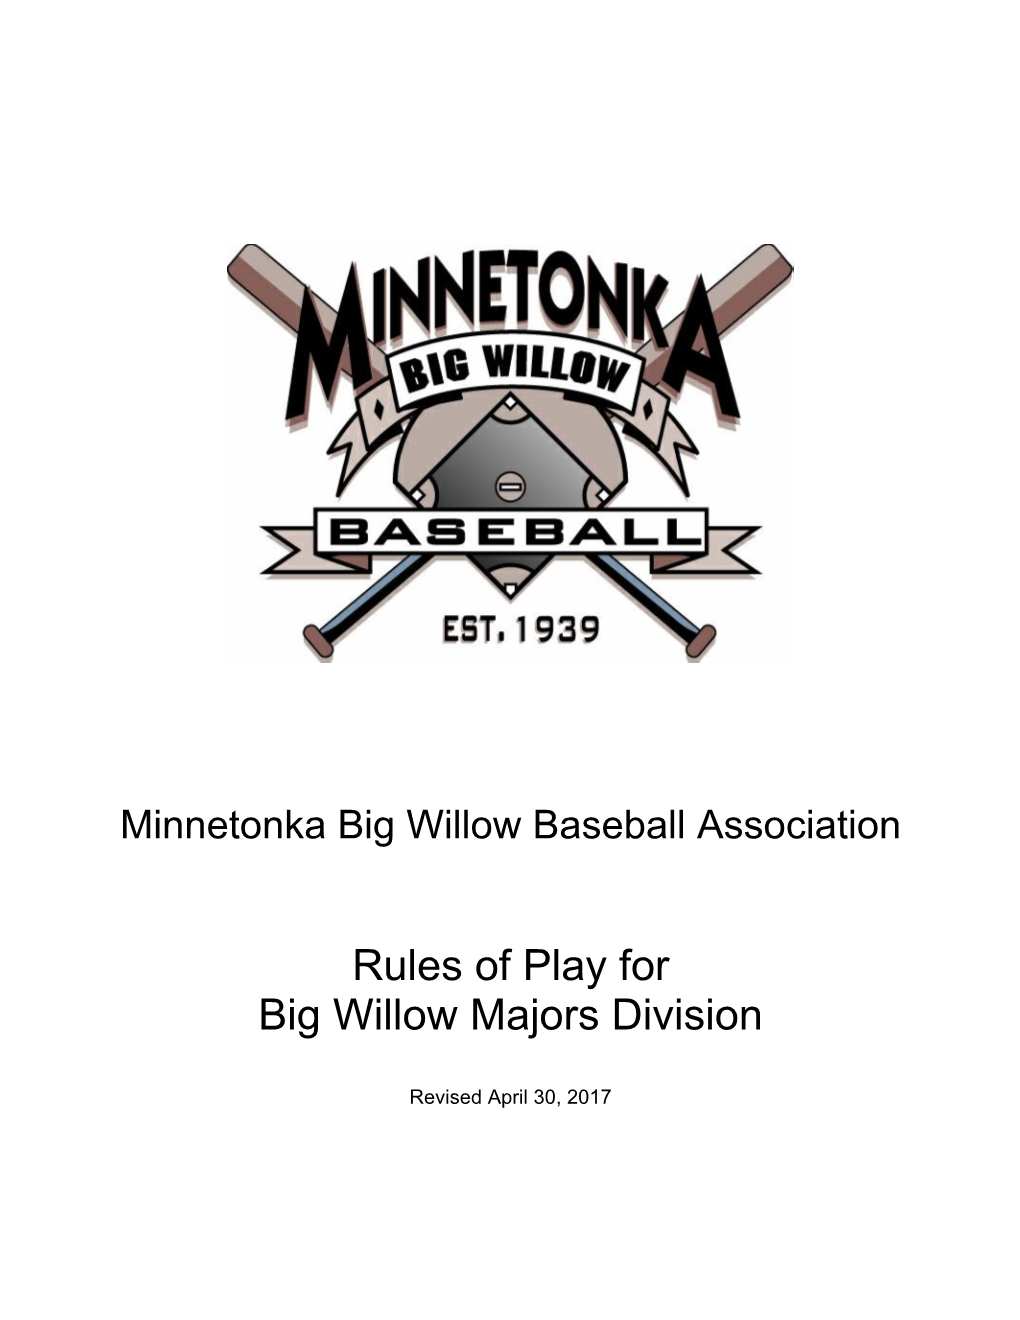 Rules of Play for Big Willow Majors Division